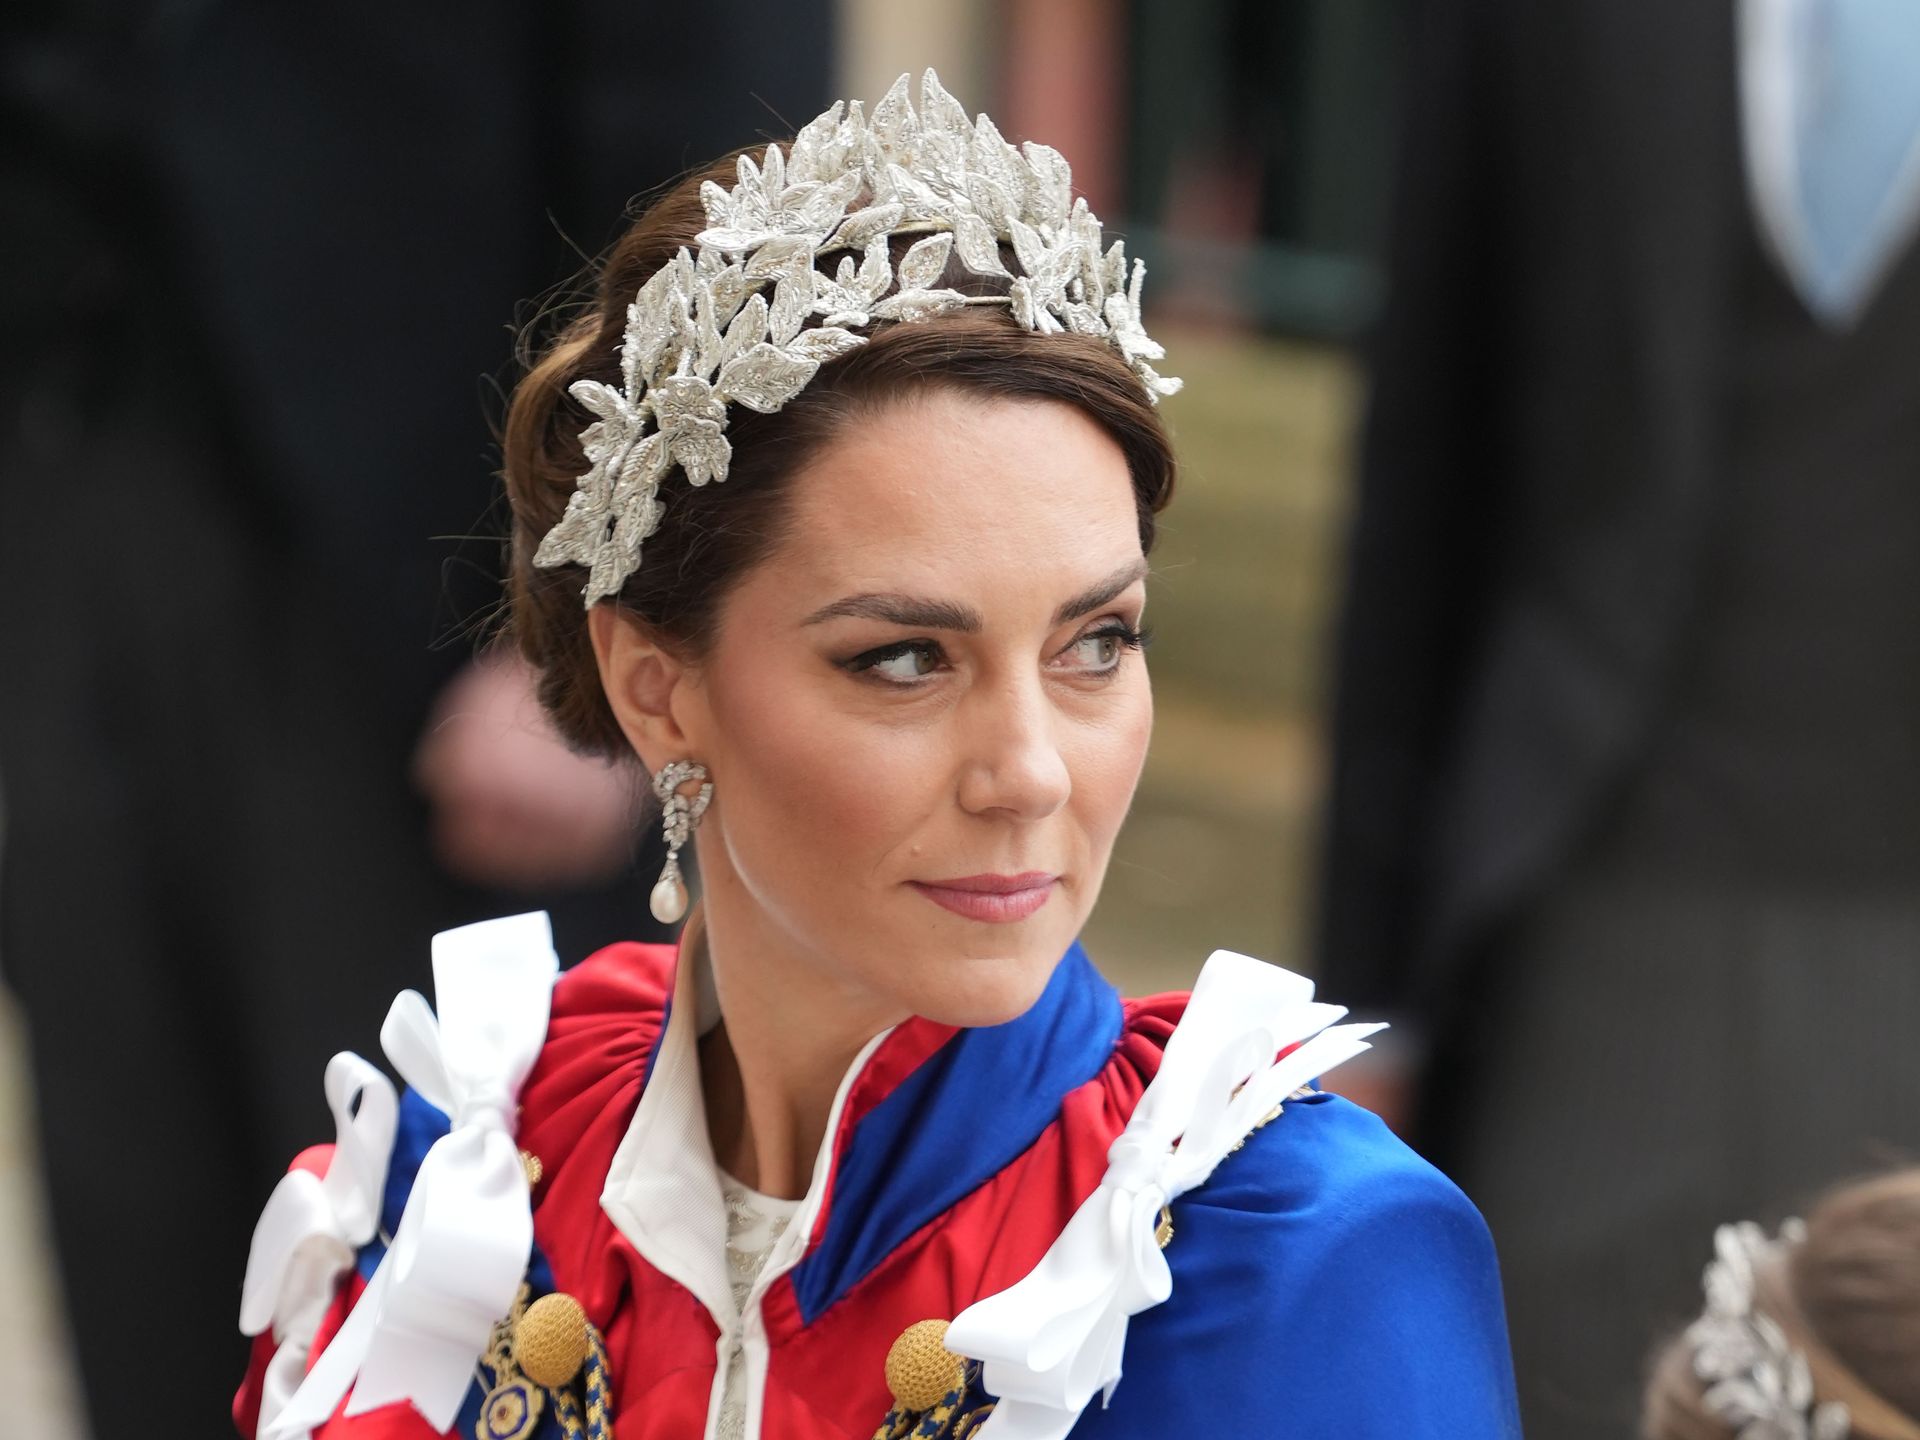 Kate Middleton coronation outfit: Princess sparkles in statement